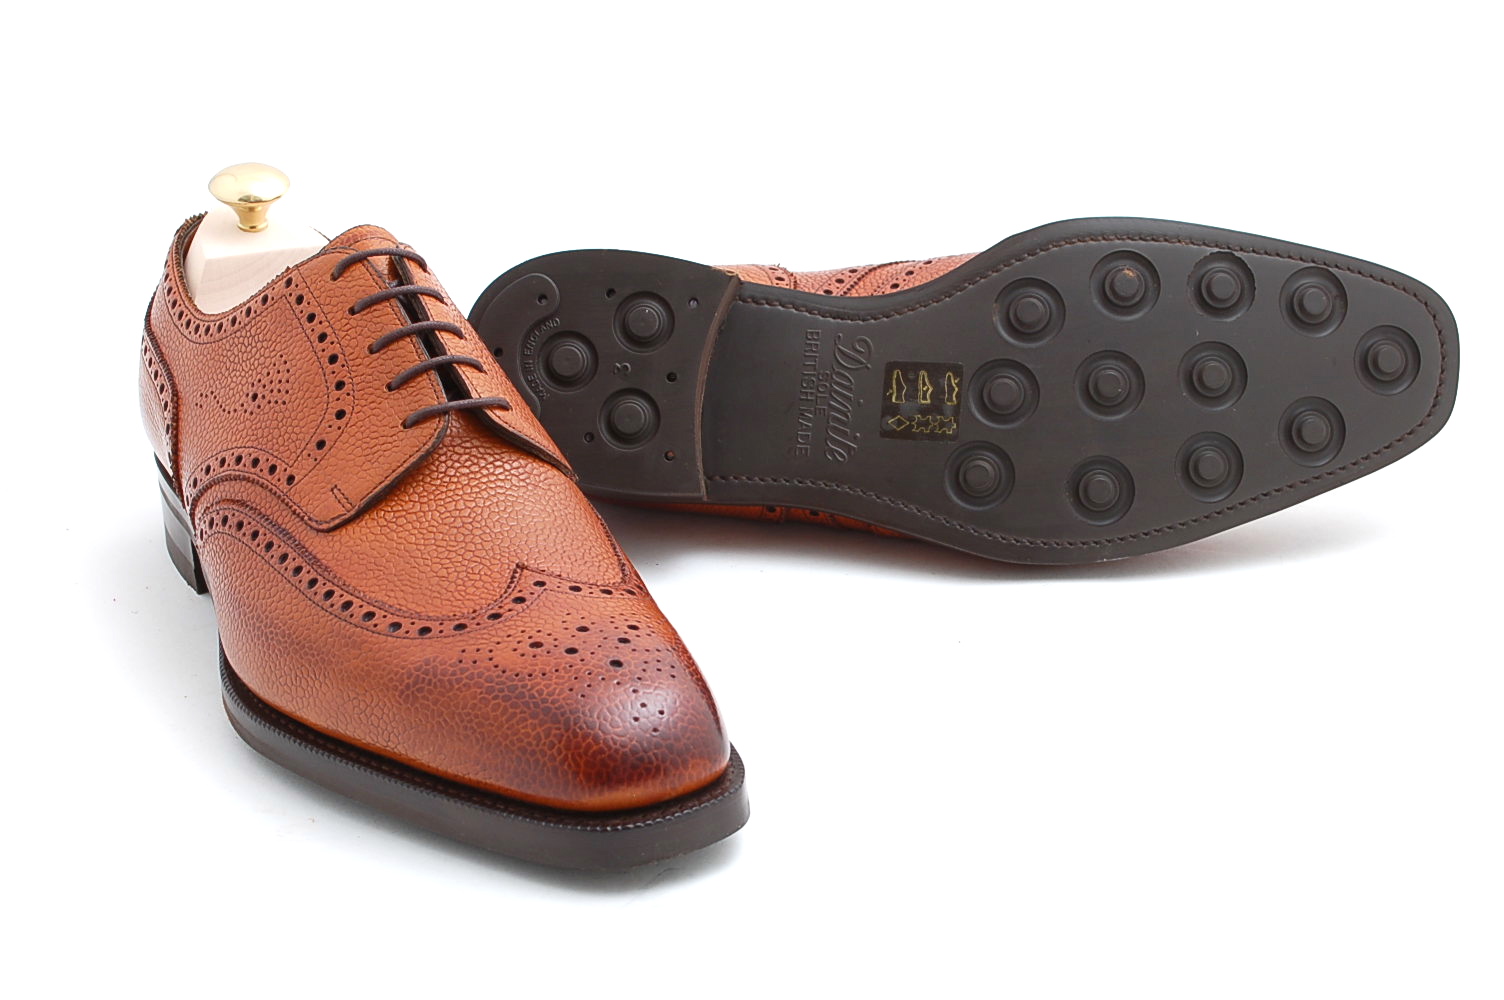 How to Choose a Quality Pair of Leather Shoes